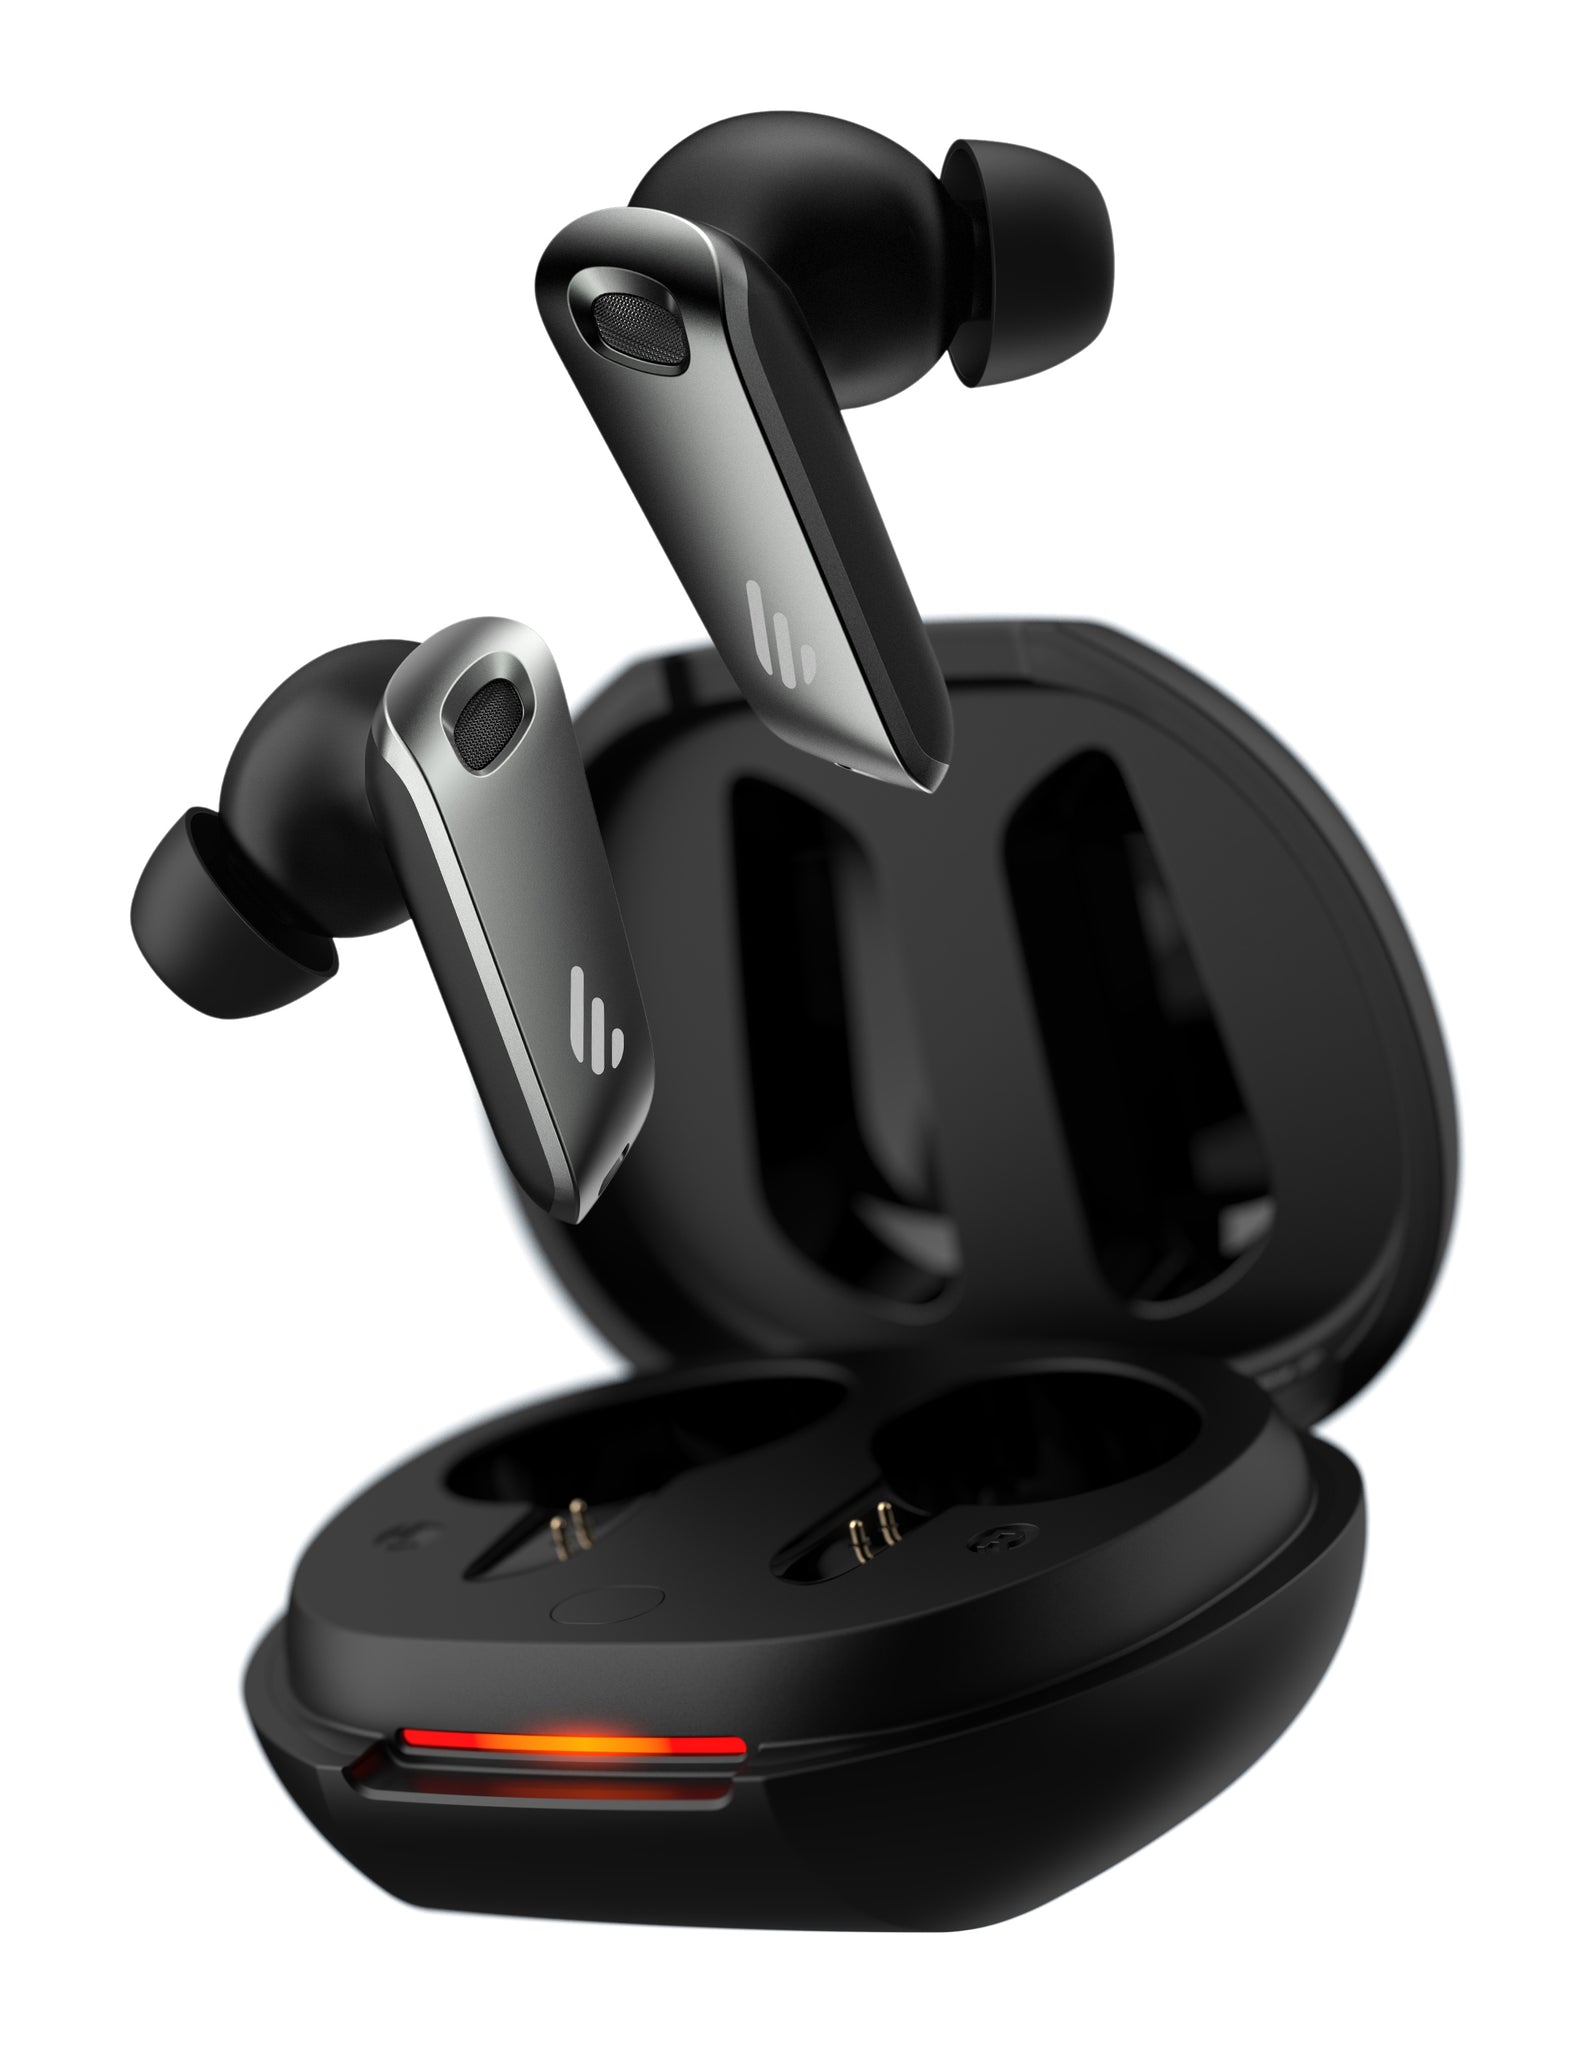 Edifier Neobuds Pro True Wireless (TWS) Bluetooth Stereo Earbuds With Active Noise Cancellation (ANC) - Black / Grey